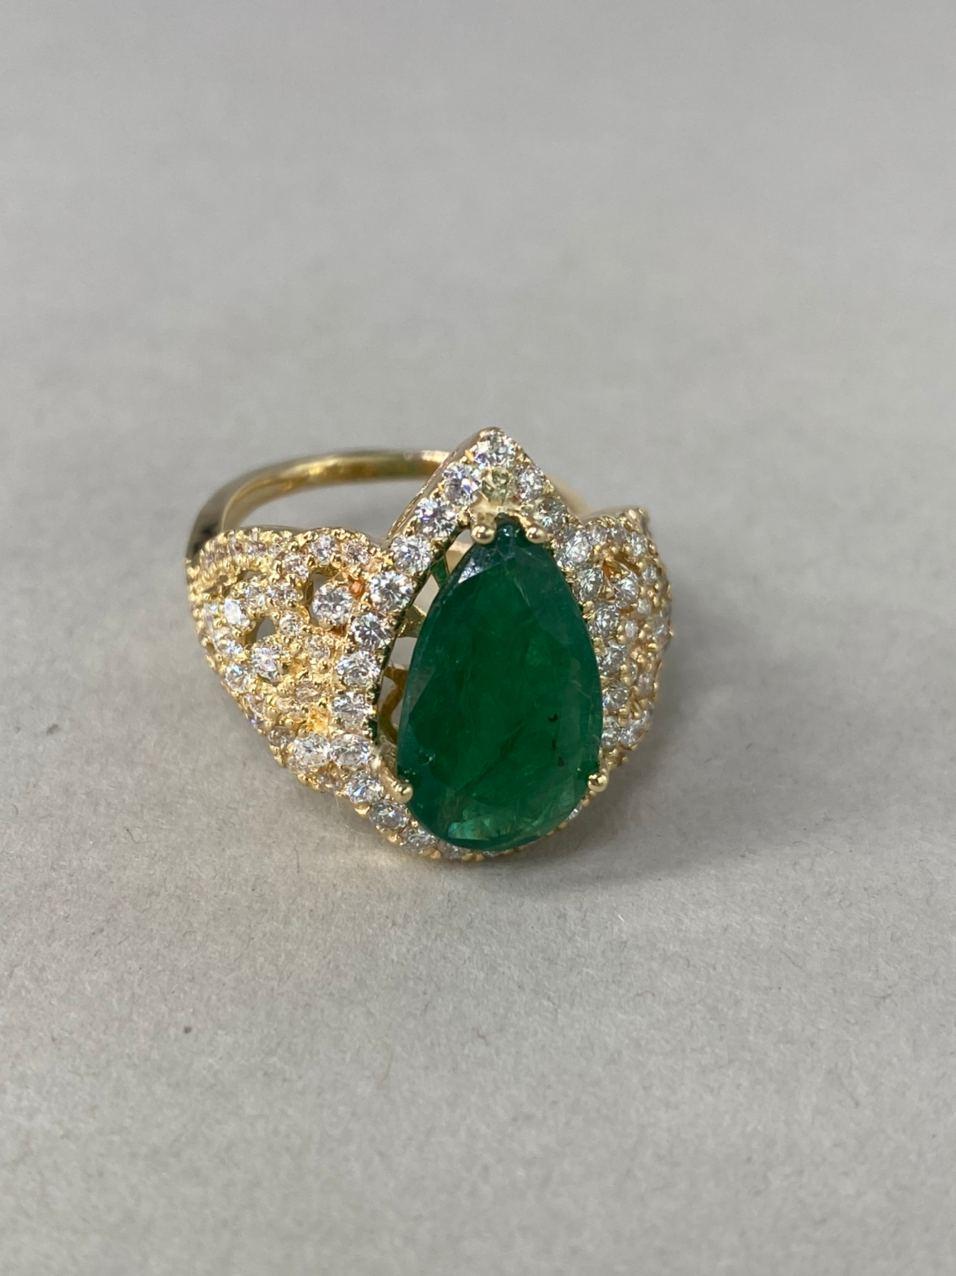 Women's Natural Deep Pear Cut Emerald 18 Karat Yellow Gold Diamond Ring for Her For Sale